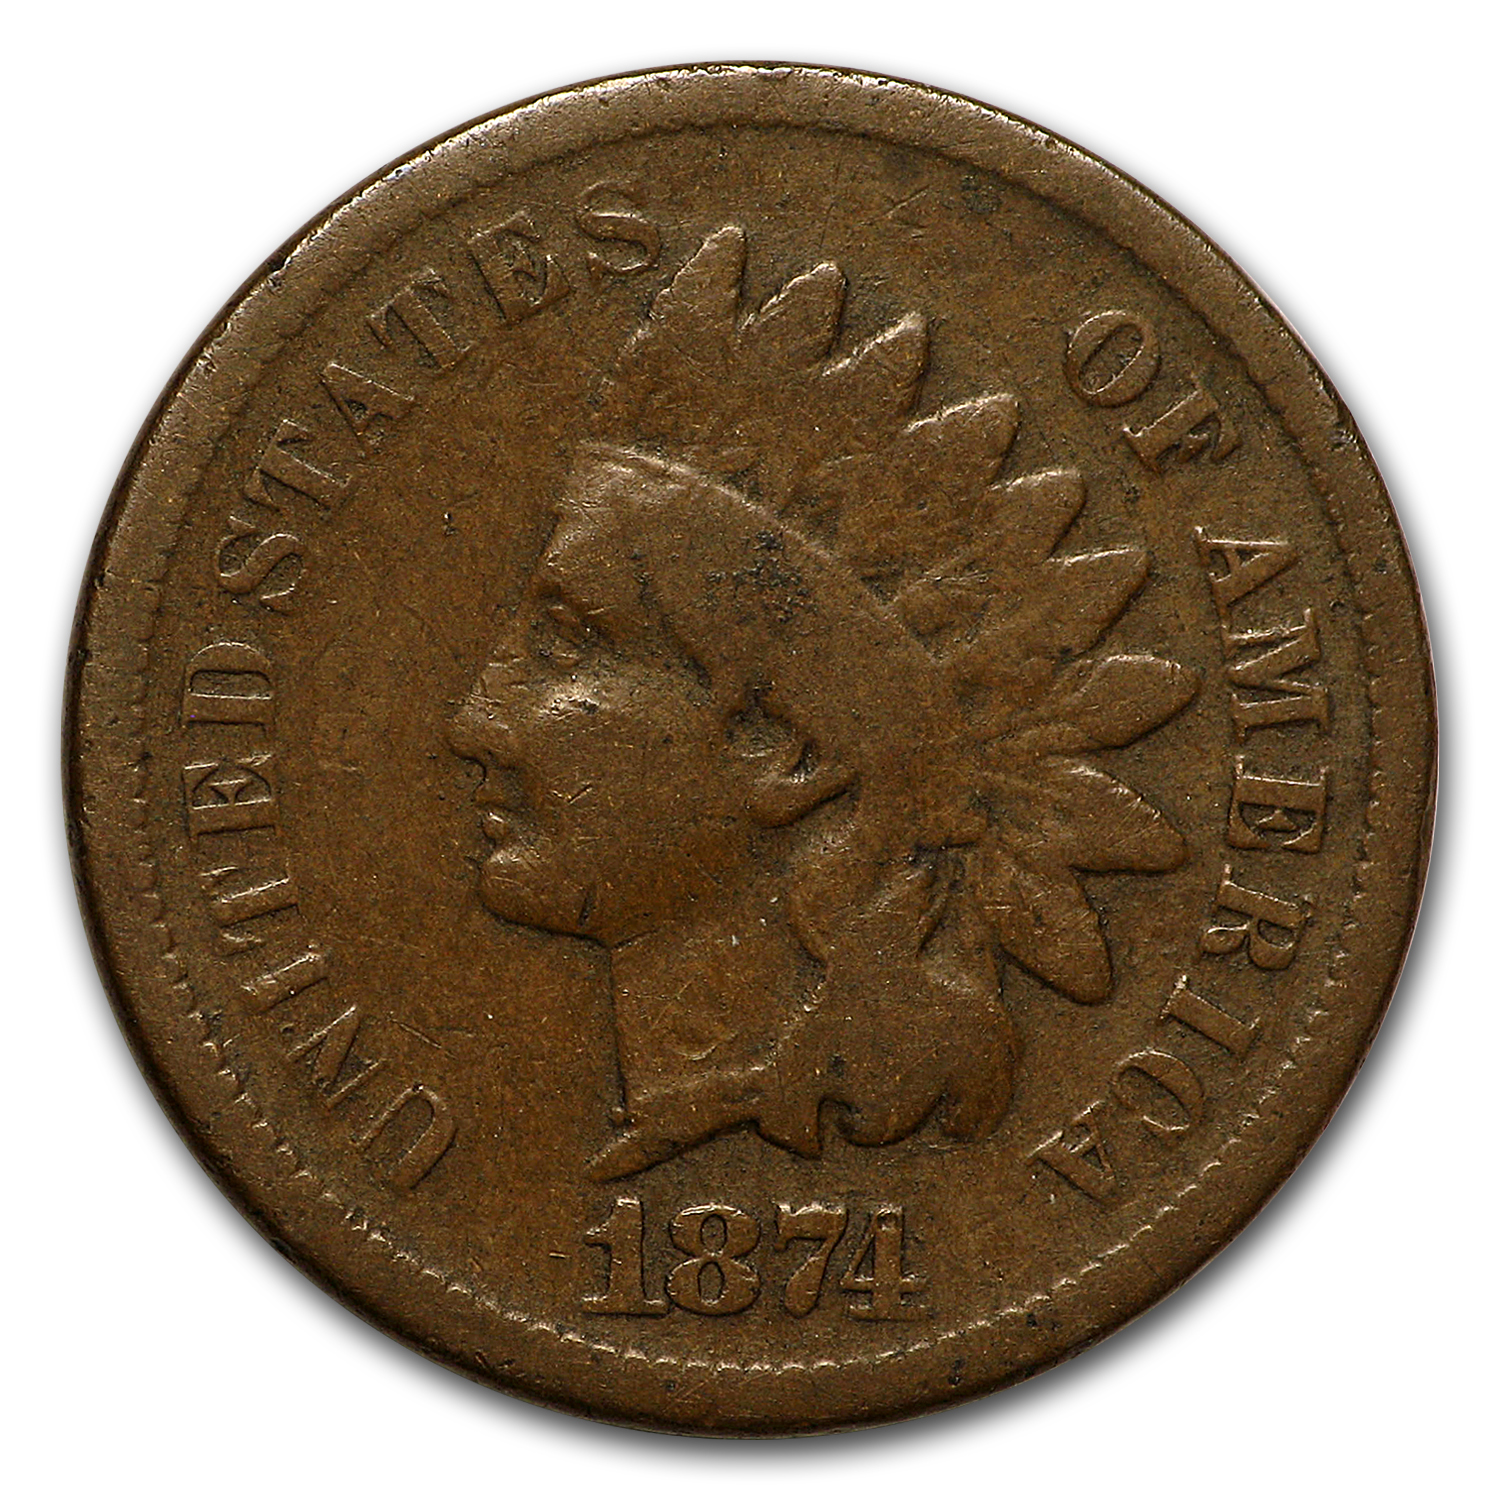 Buy 1874 Indian Head Cent VG